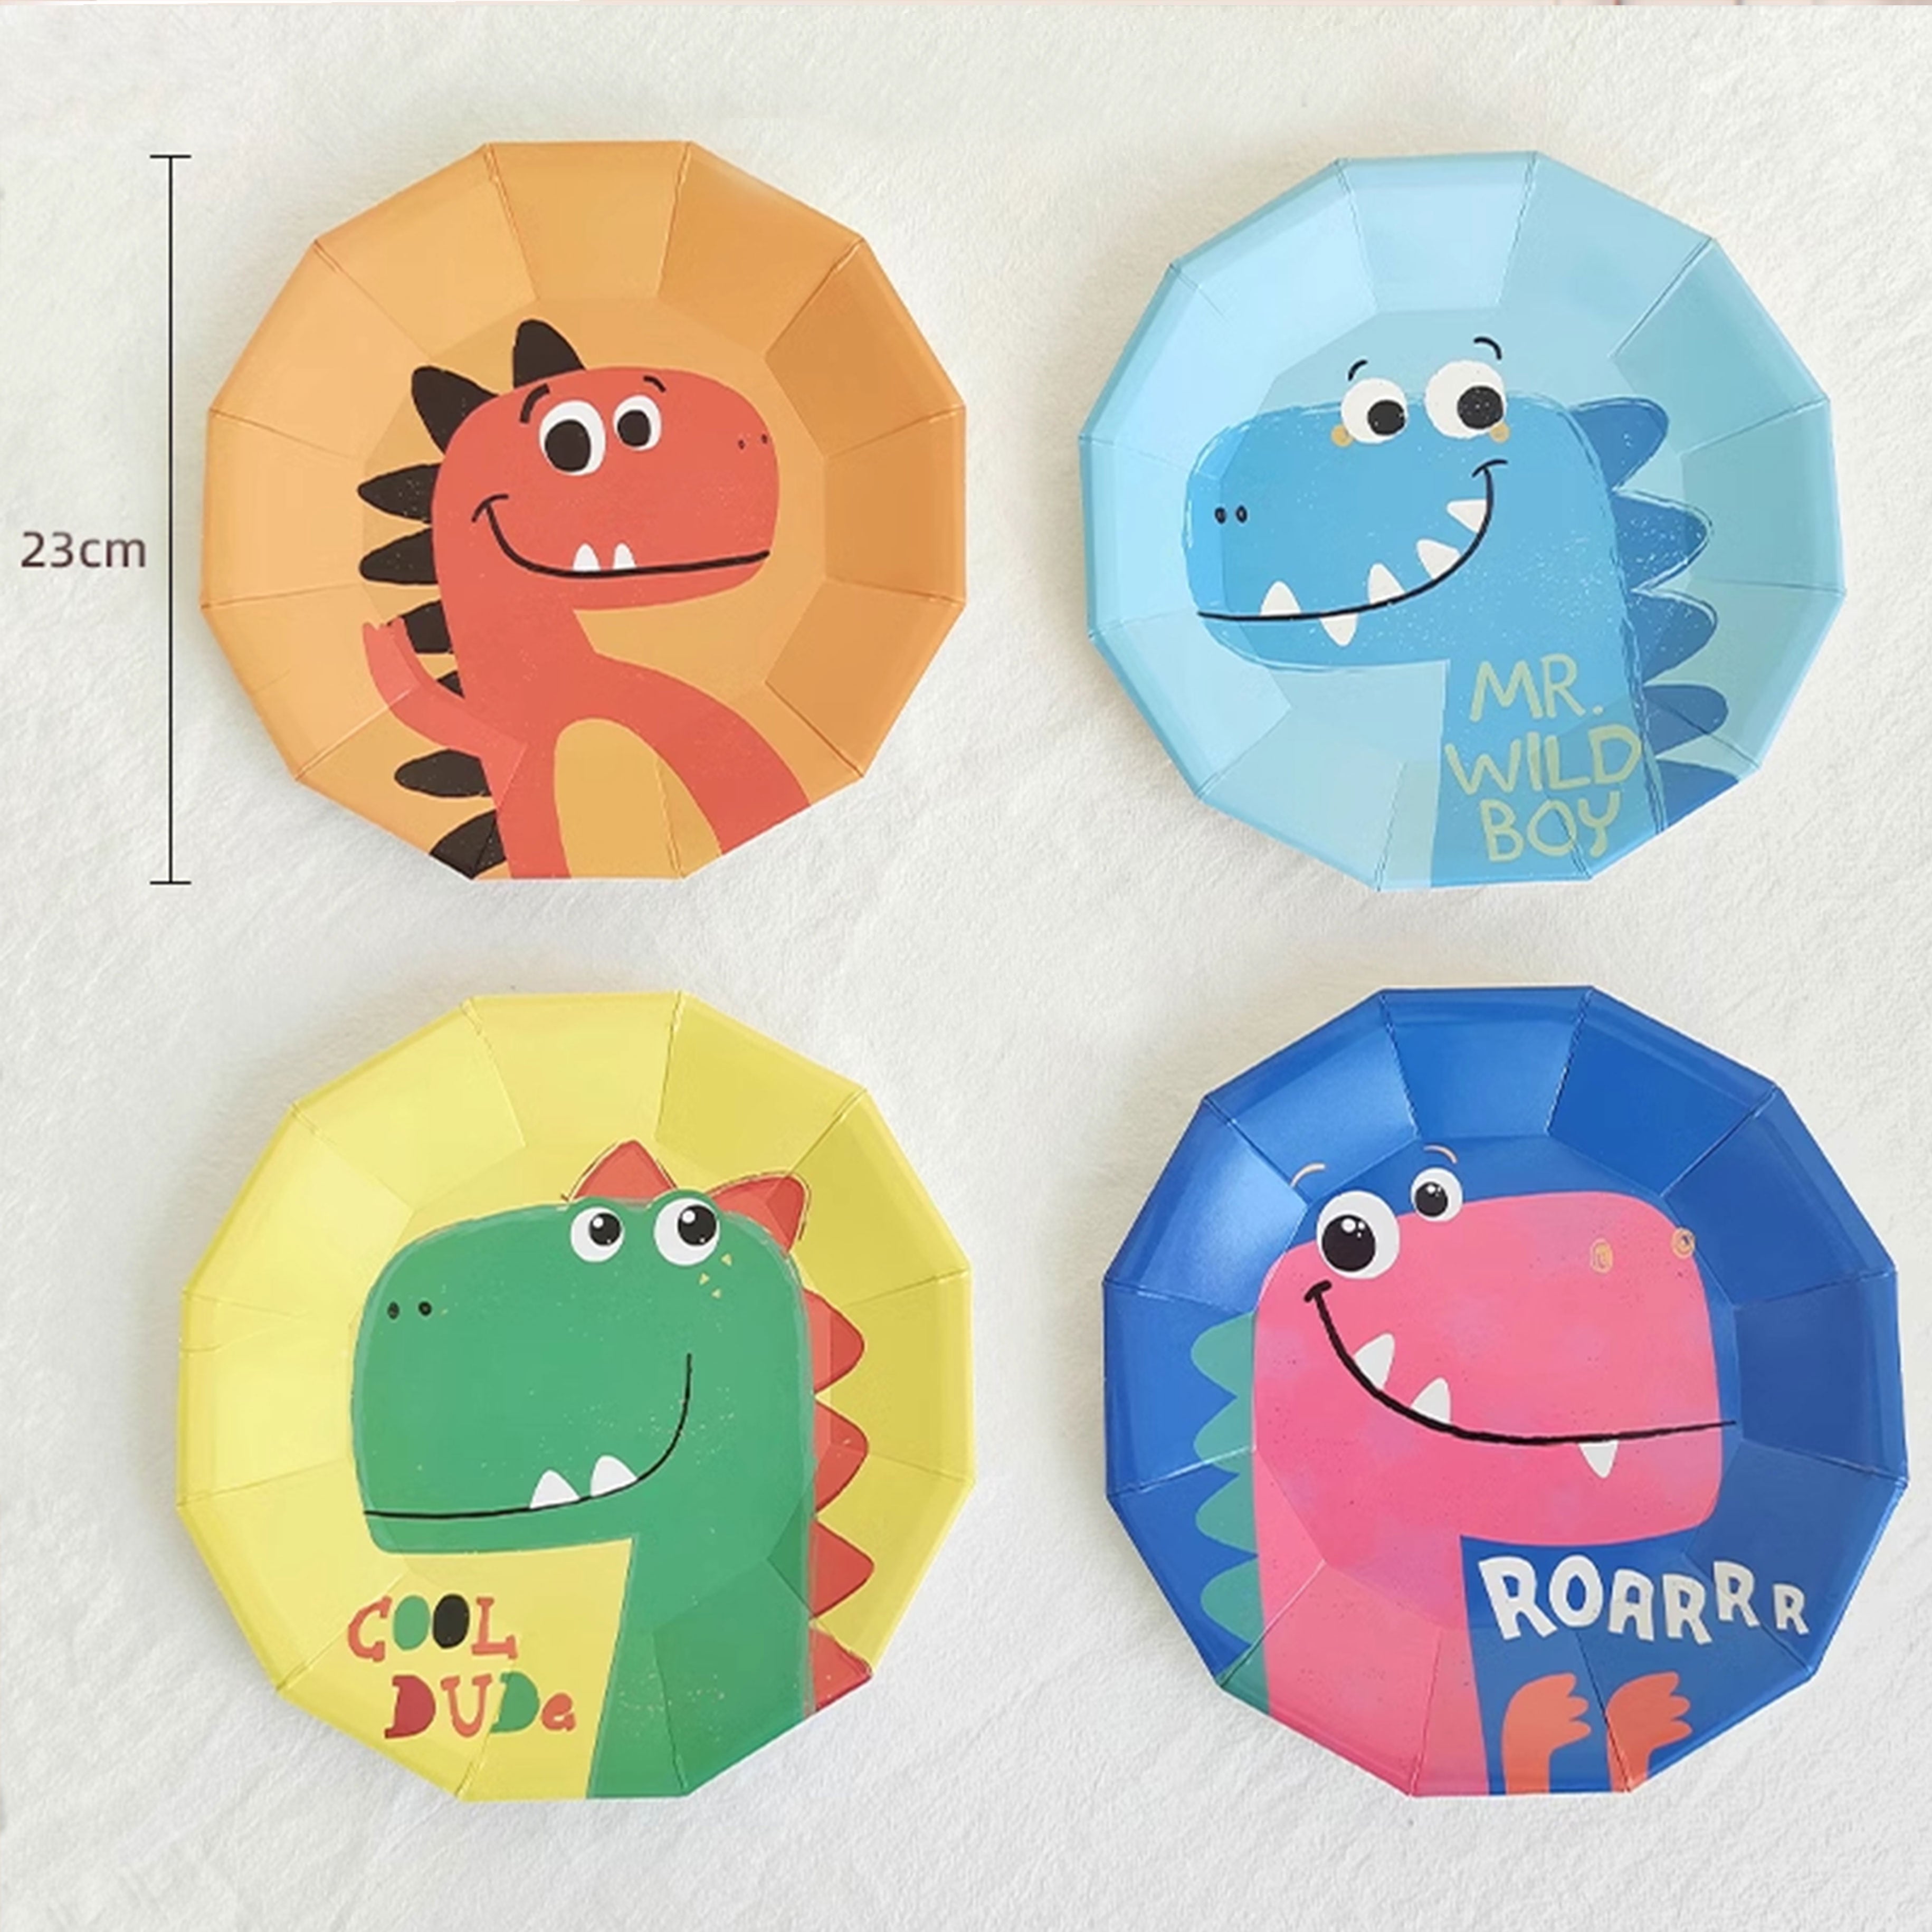 Science-themed cartoon plates for kids' parties